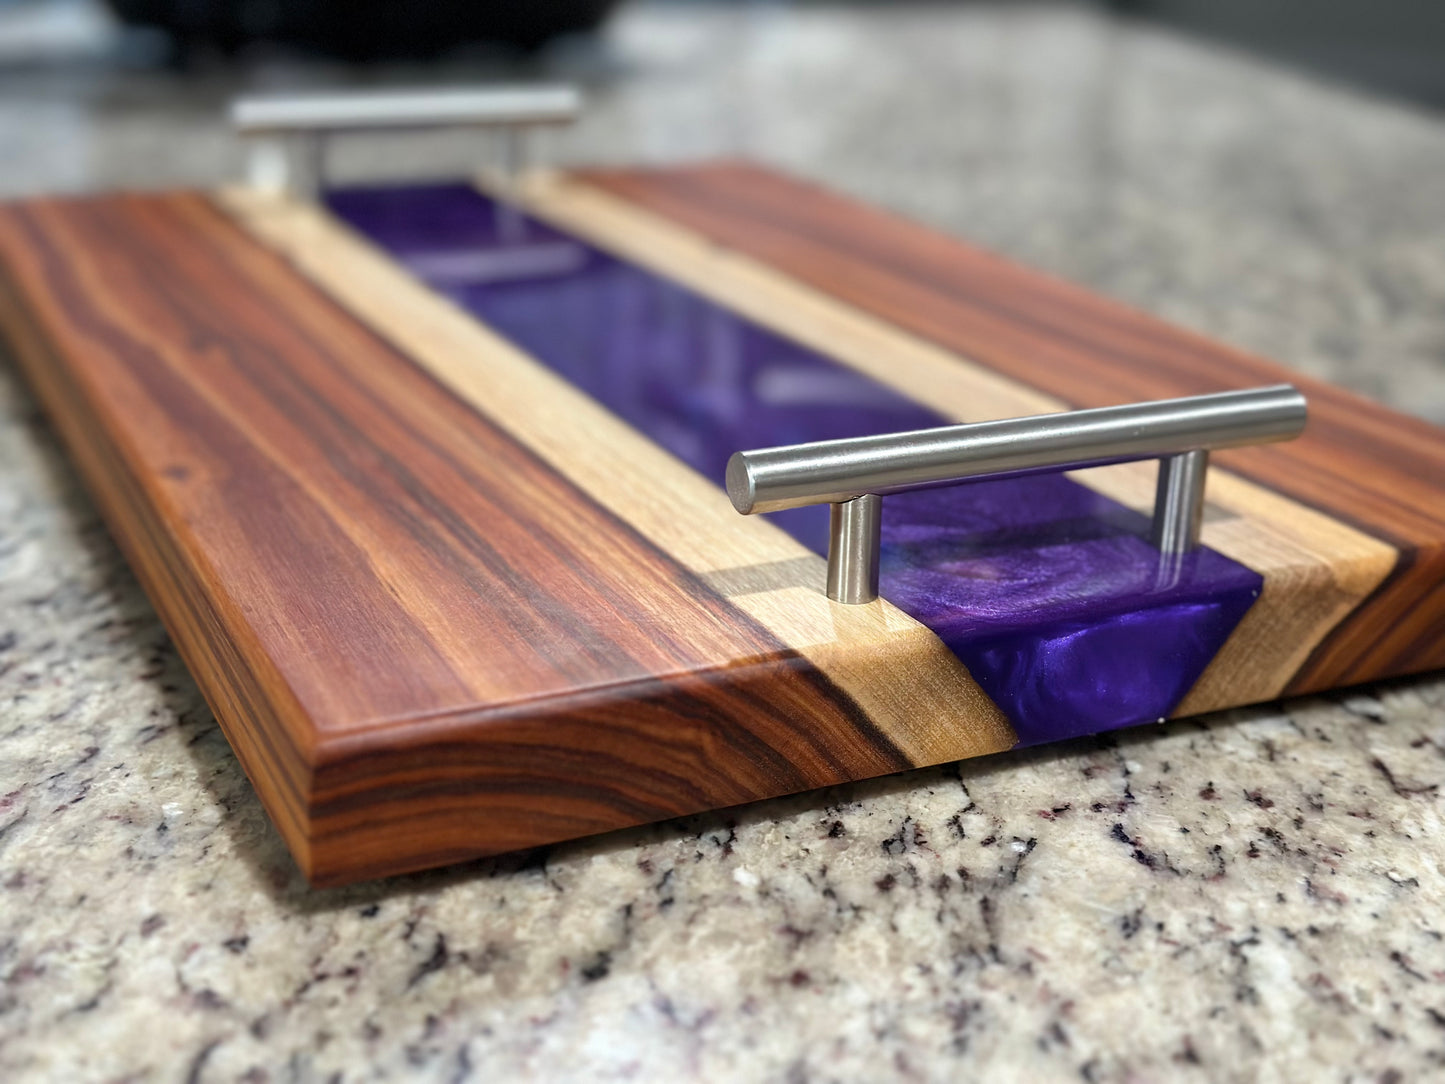 The Iris River Serving Tray